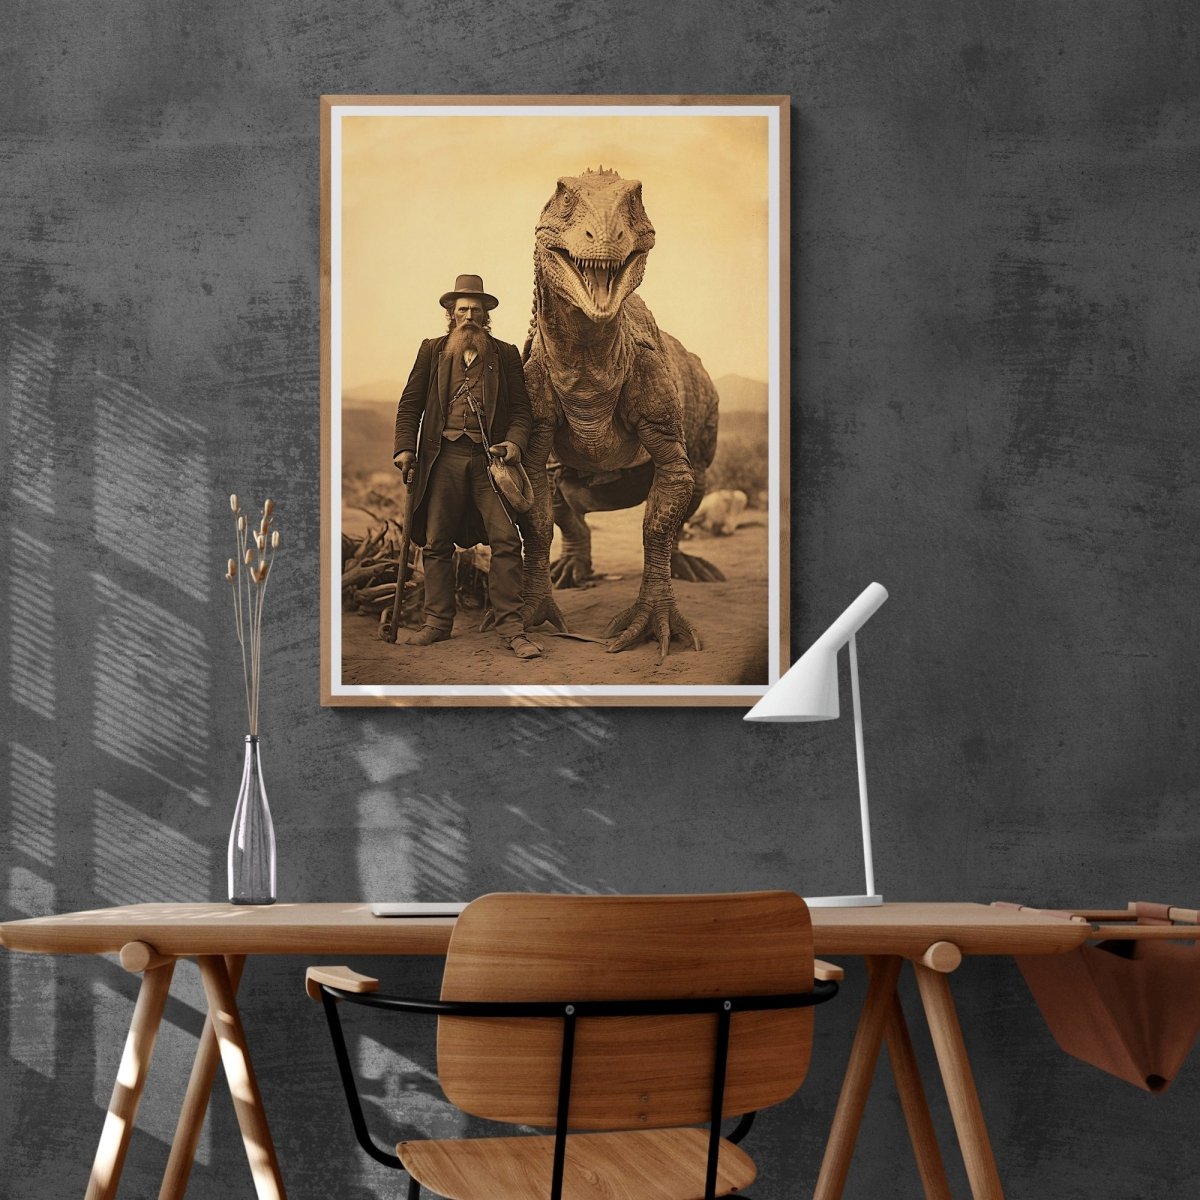 Wild West Dinosaur Wall Art Vintage Photography Witchy Decor Gothic Jurassic Poster Dark Cottagecore Dark Academia Home Print Paper Poster Print - Everything Pixel